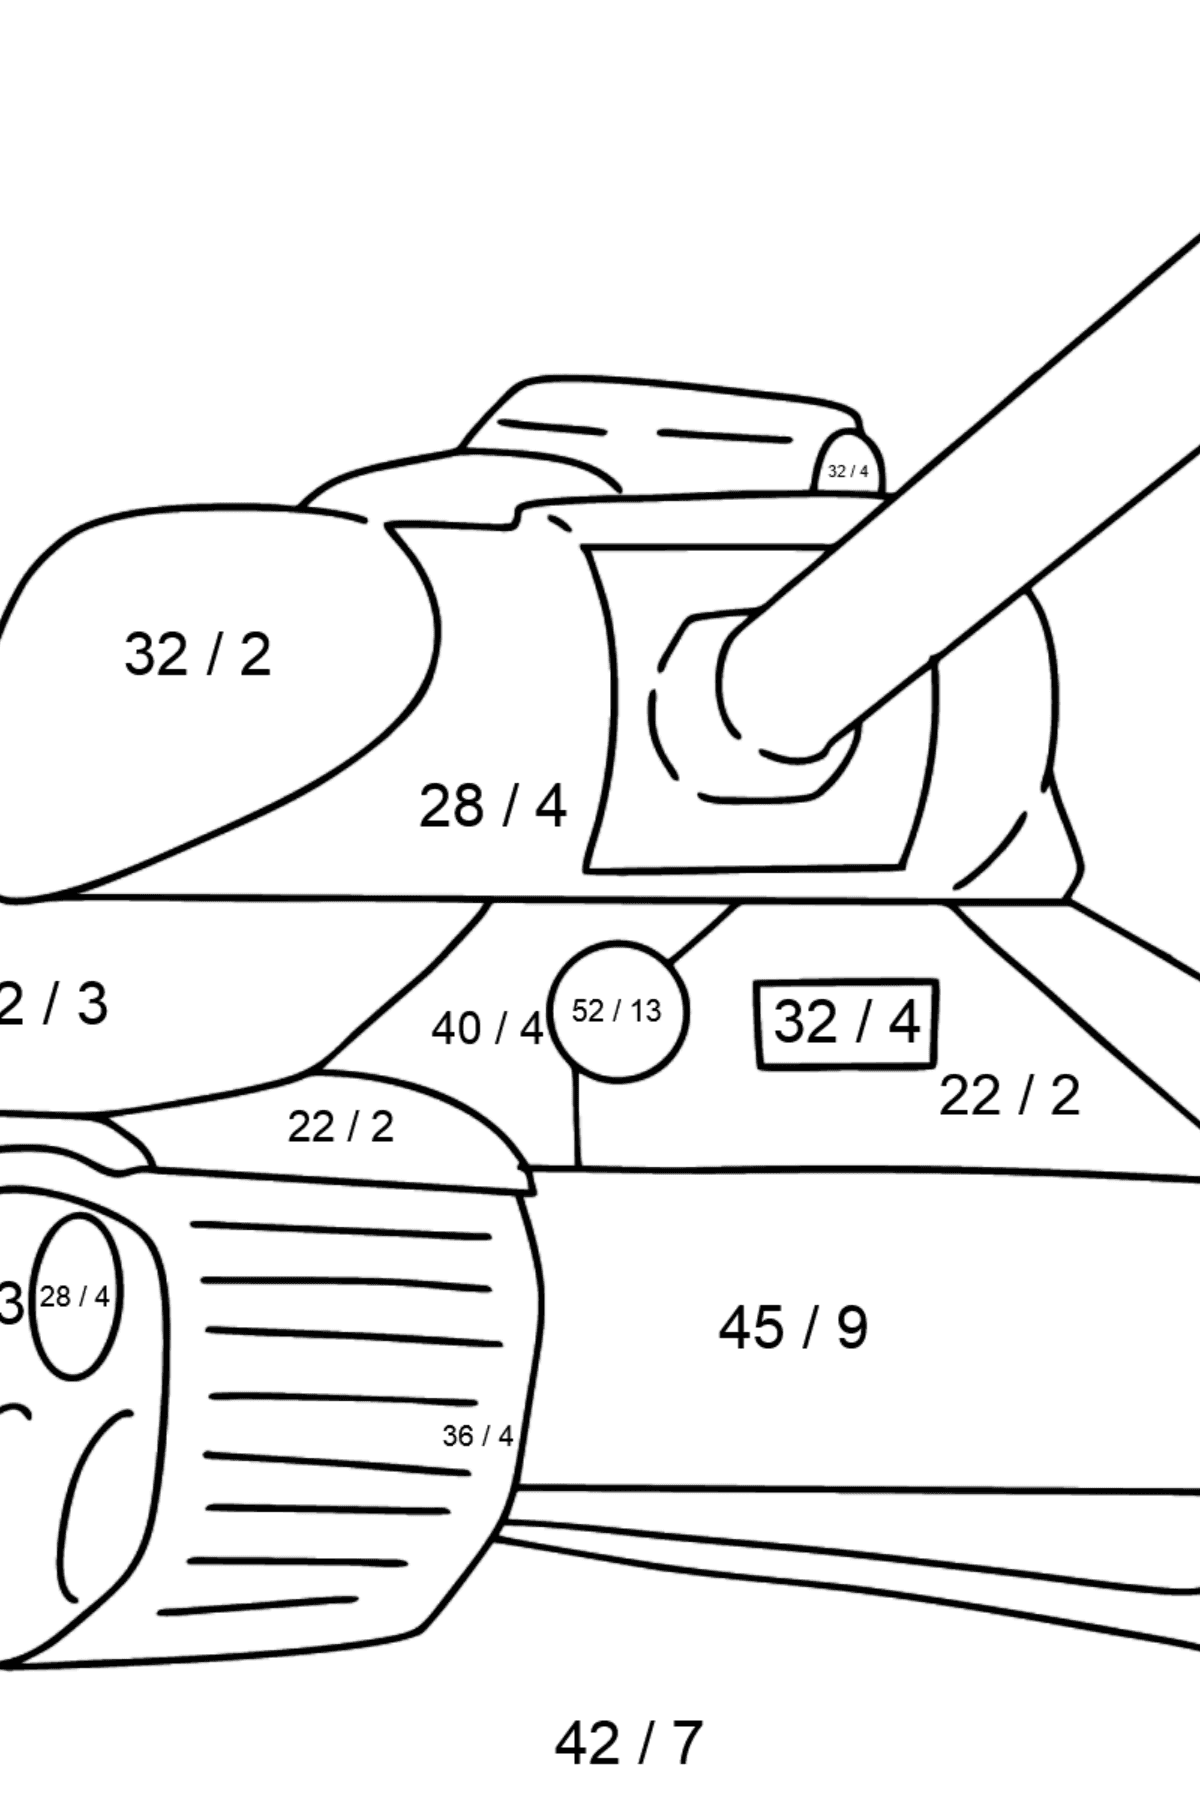 Tank IS 2 coloring page - Math Coloring - Division for Kids